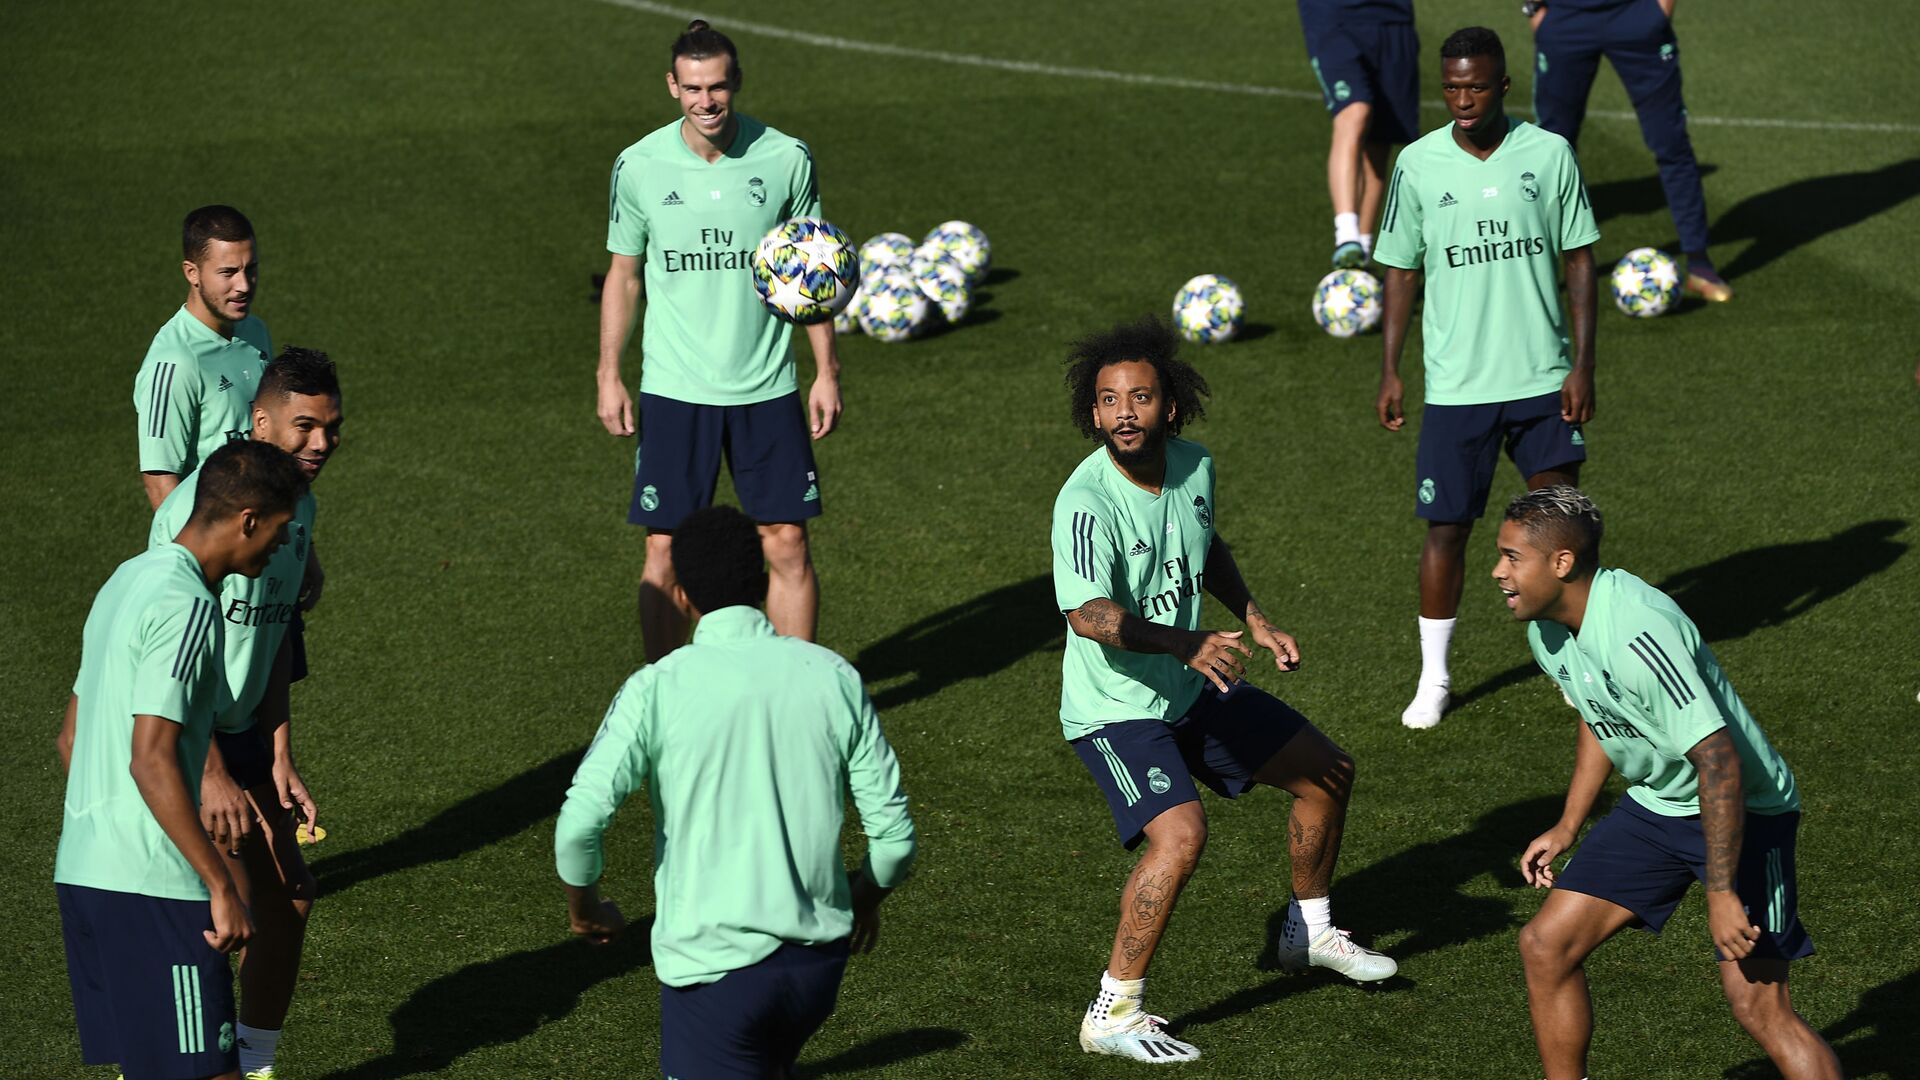 Real Madrid's French defender Raphael Varane, Real Madrid's Brazilian midfielder Casemiro, Real Madrid's Belgian forward Eden Hazard, Real Madrid's Welsh forward Gareth Bale, Real Madrid's Brazilian defender Marcelo Real Madrid's Brazilian forward Vinicius Junior and Real Madrid's Dominicans forward Mariano Diaz attend a training session at the Valdebebas training complex in the outskirts of Madrid, on September 30, 2019 - اسپوتنیک افغانستان  , 1920, 01.05.2021